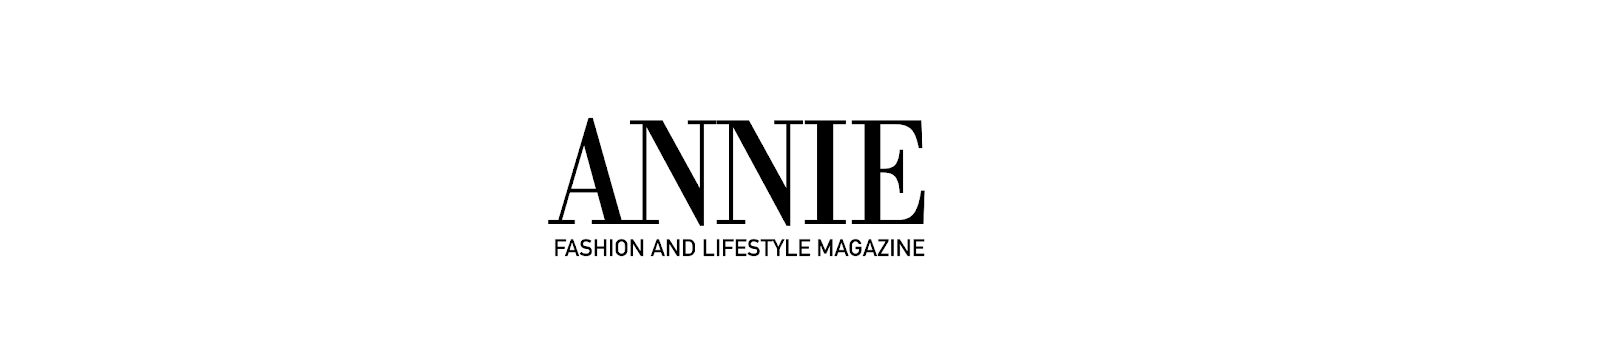 ANNIE - Online Magazine for Fashion Lifestyle Beauty